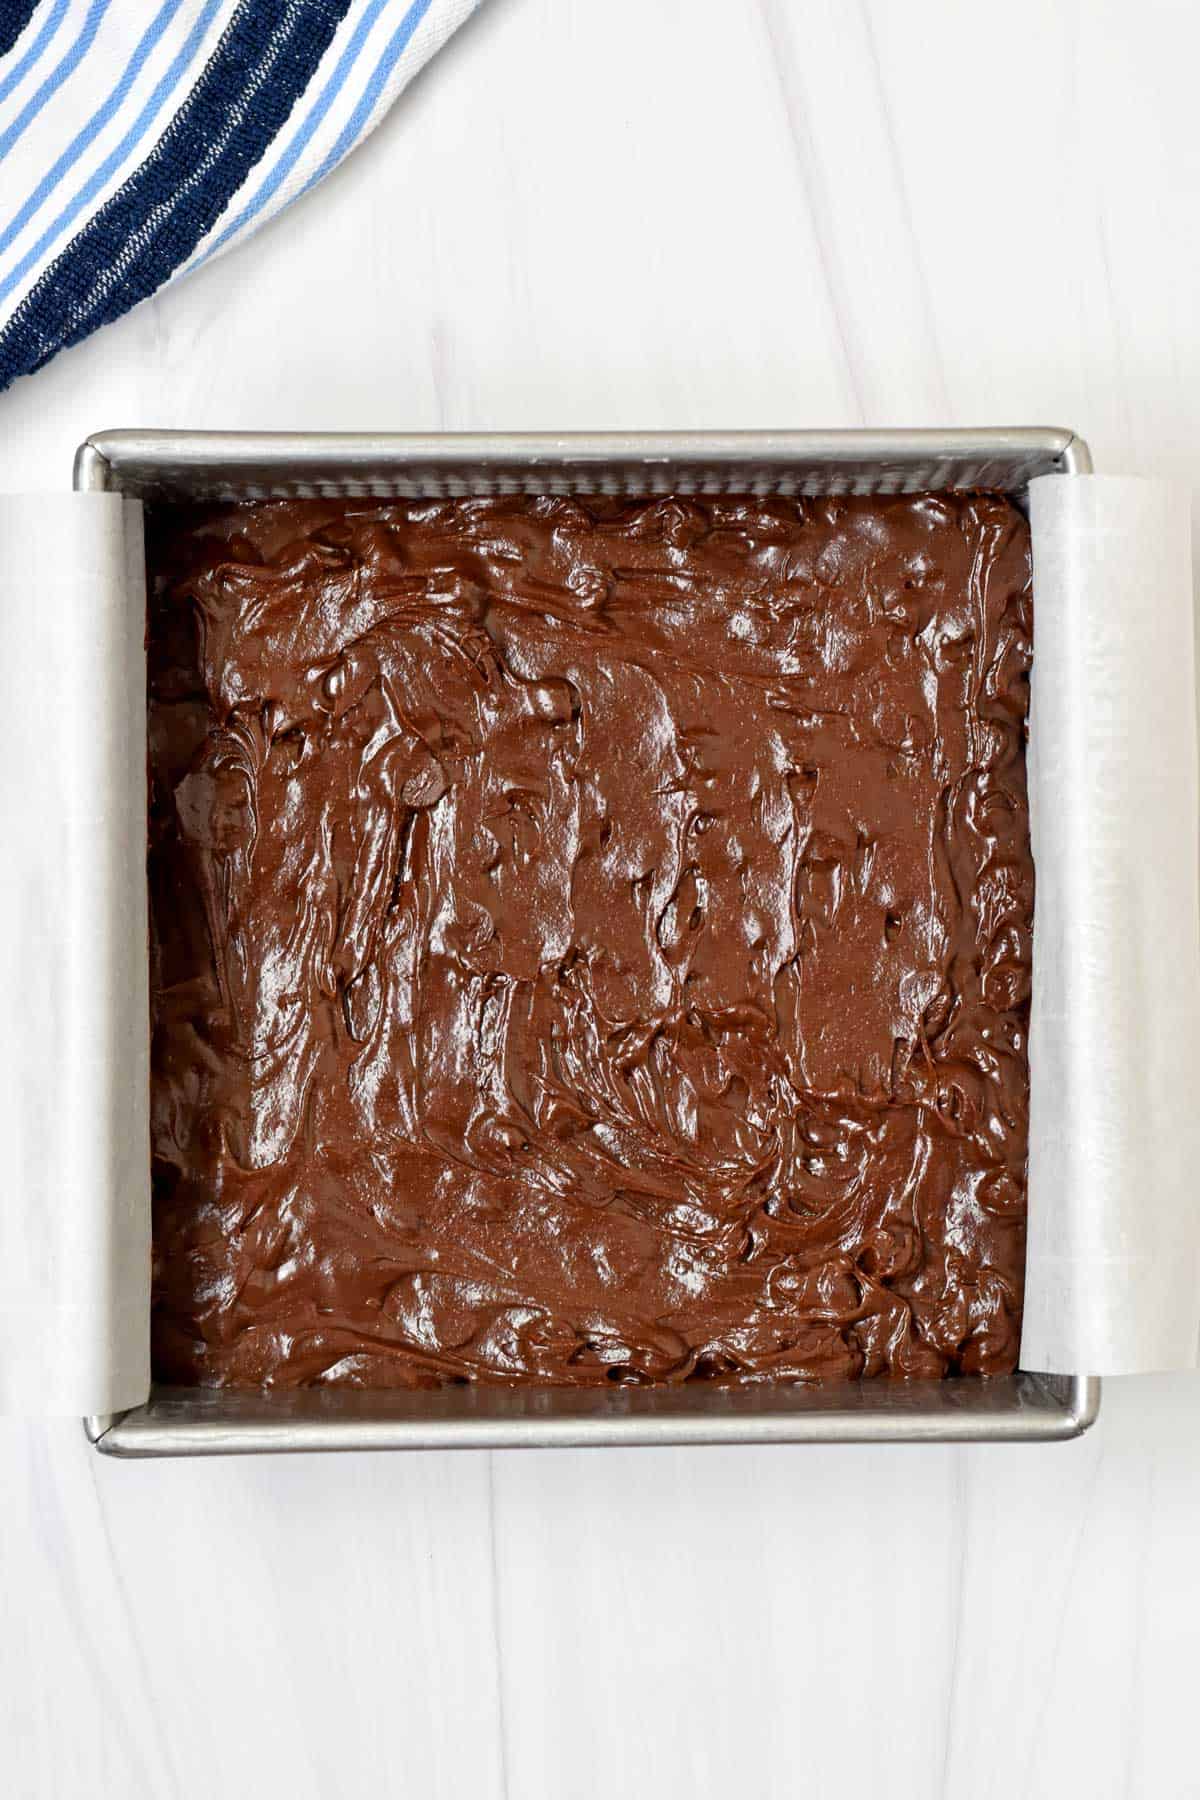 Unbaked gluten free double chocolate brownies batter in parchment lined baking pan.